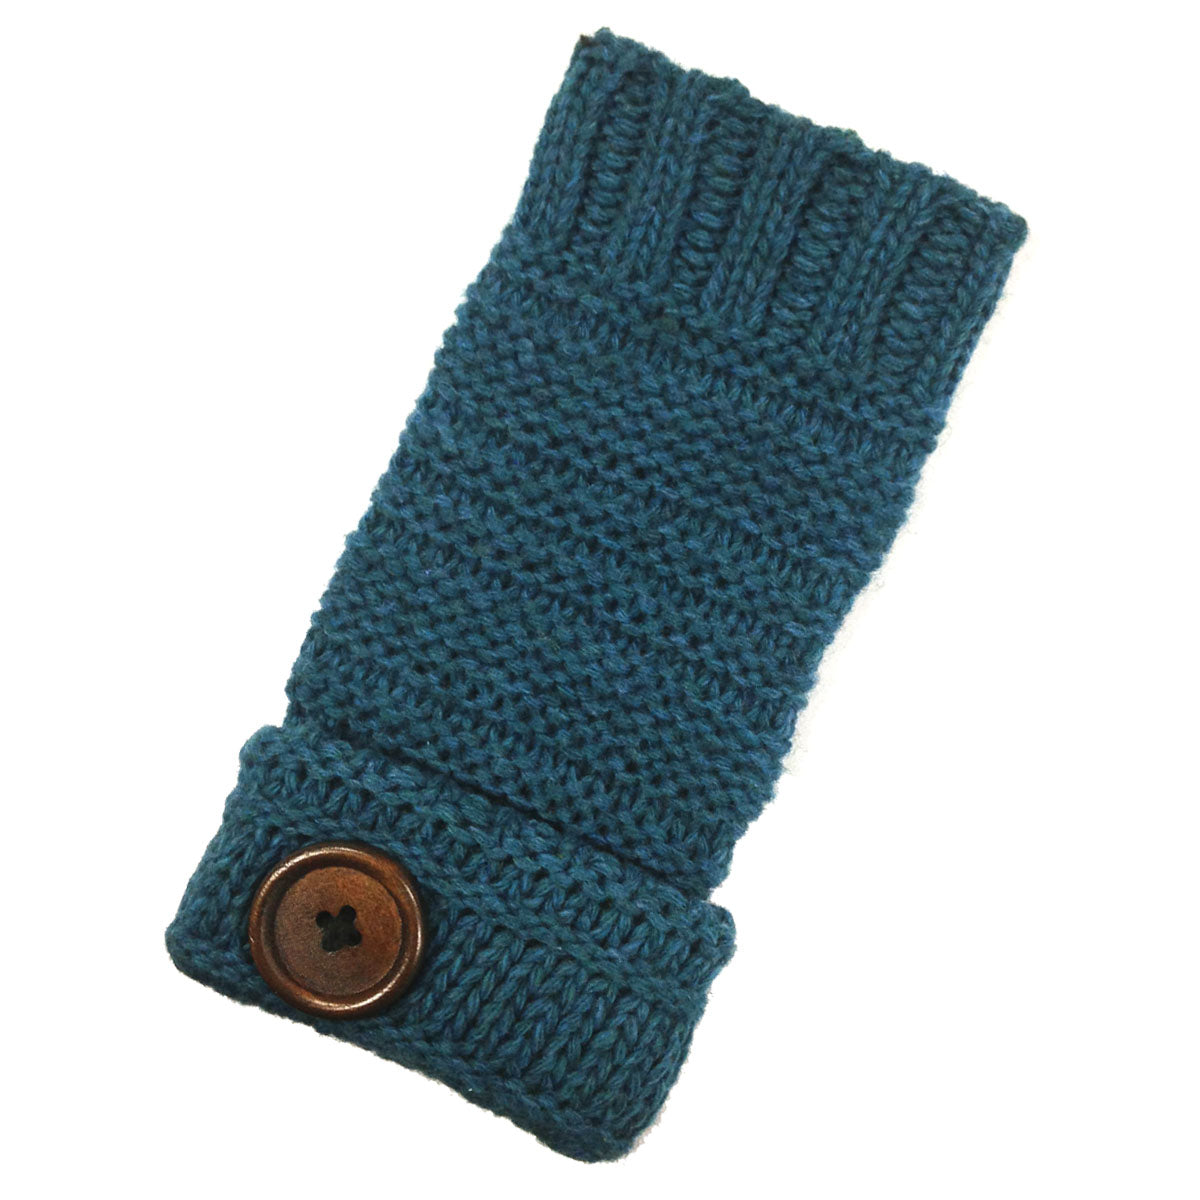 Wrapables Fingerless Gloves with Button Accent